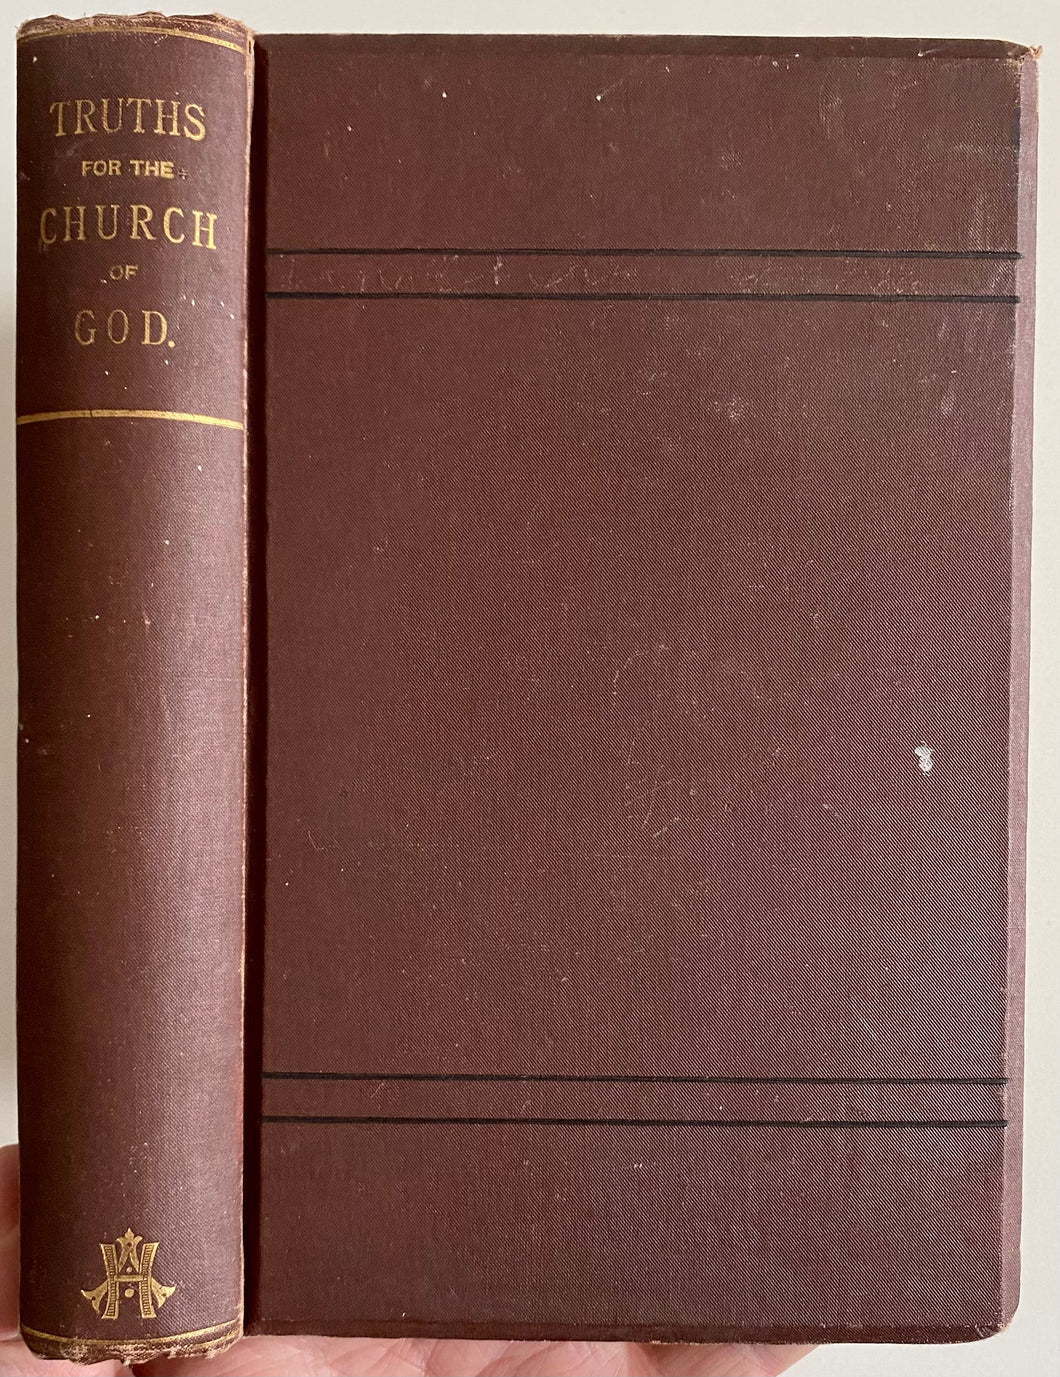 1834 PLYMOUTH BRETHREN. Scripture Subjects and Truths for the Church of God. Melchisedec, Apostacy, &c.